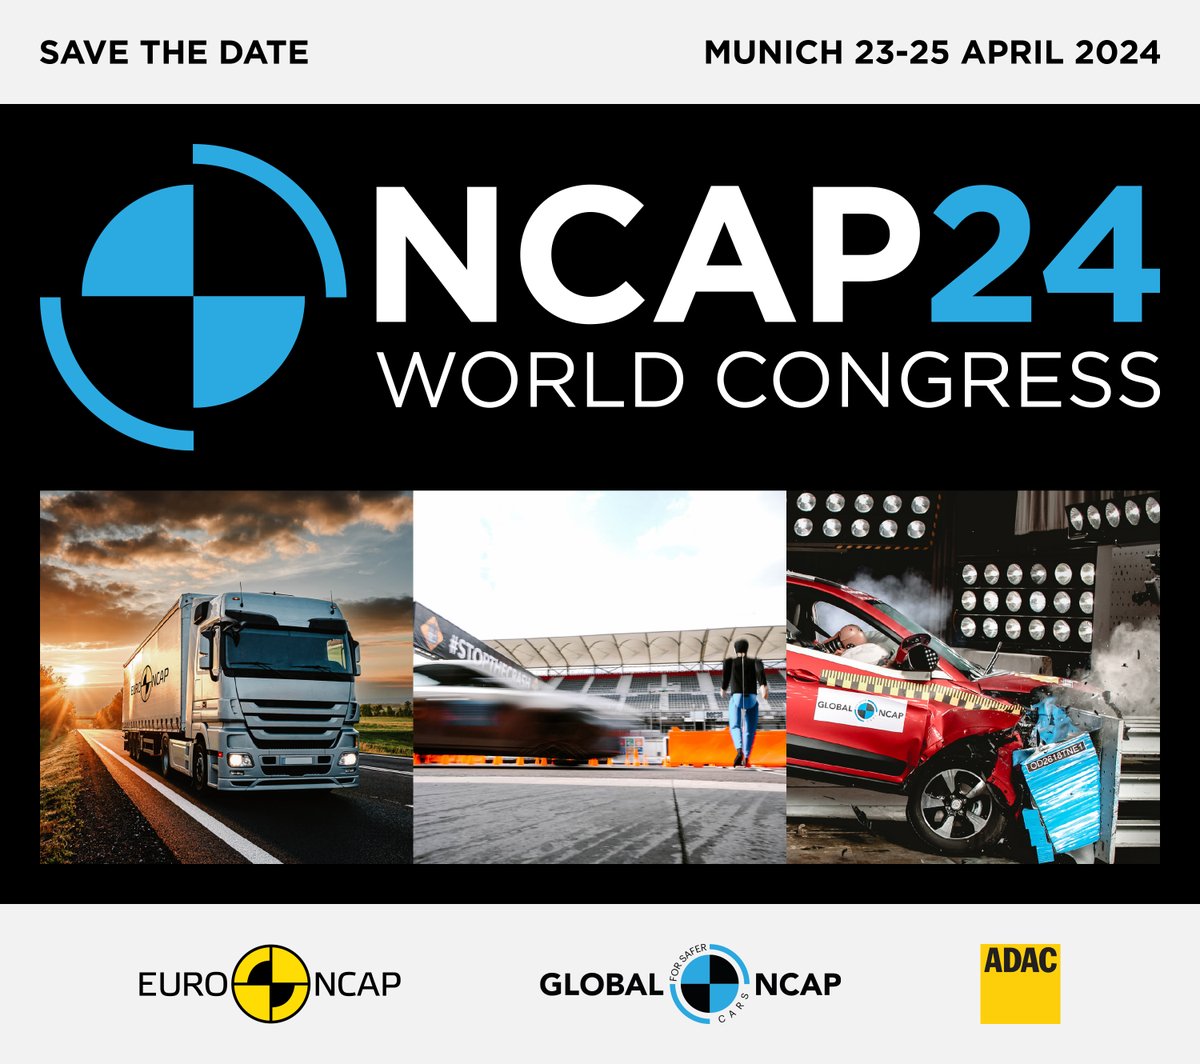 Our #NCAP24 World Congress in partnership with @EuroNCAP & @ADAC, will bring together NCAPs, regulators, OEMs & key industry stakeholders from around the world for discussions on the global future for safer vehicles and more sustainable mobility. globalncap.org/ncap24